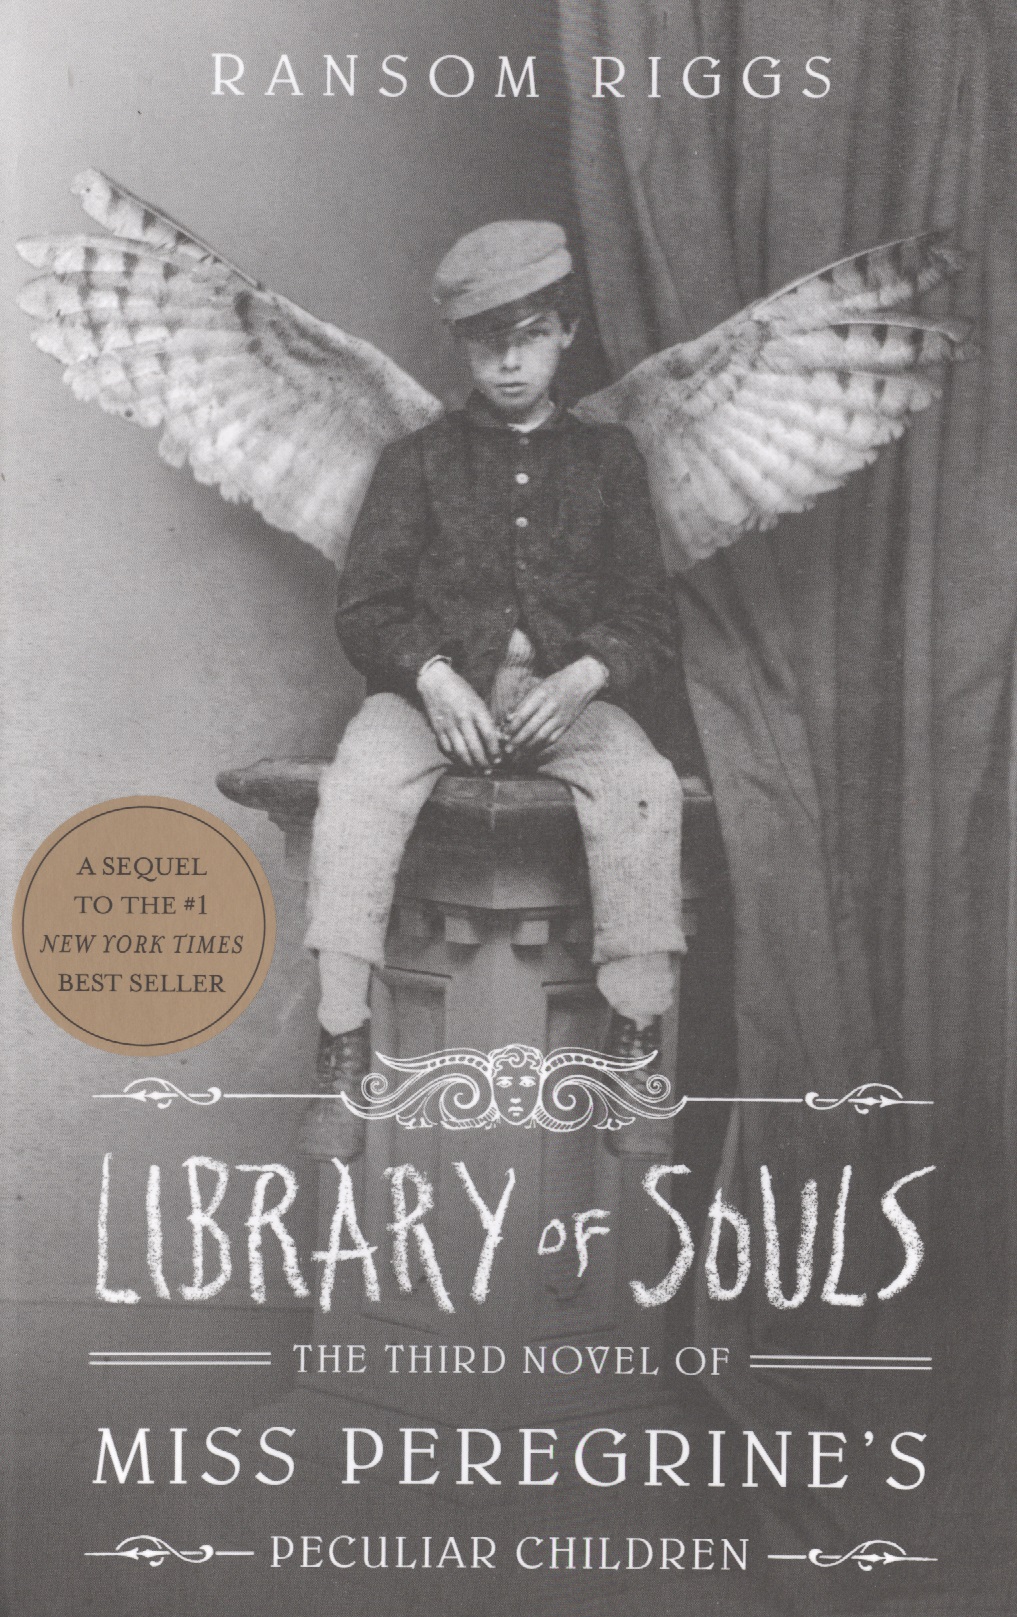 Riggs Ralph M. Library of Souls riggs ransom library of souls the third novel of miss peregrine s home for peculiar children